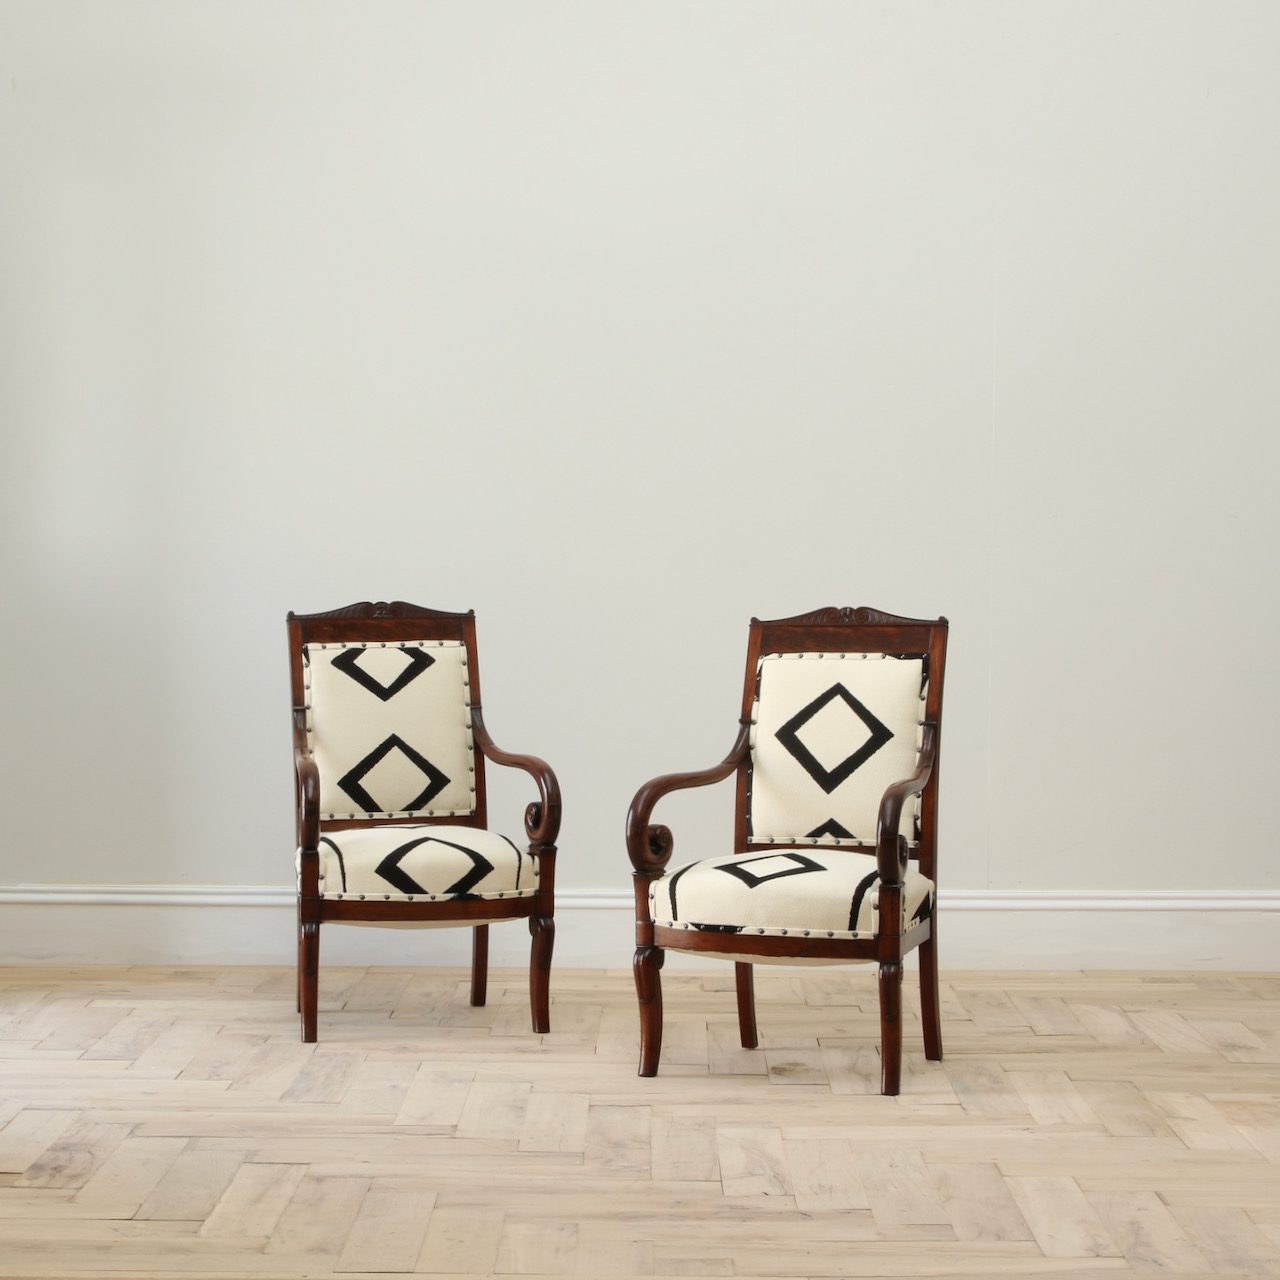 131-8 - Pair of Empire Fauteuil